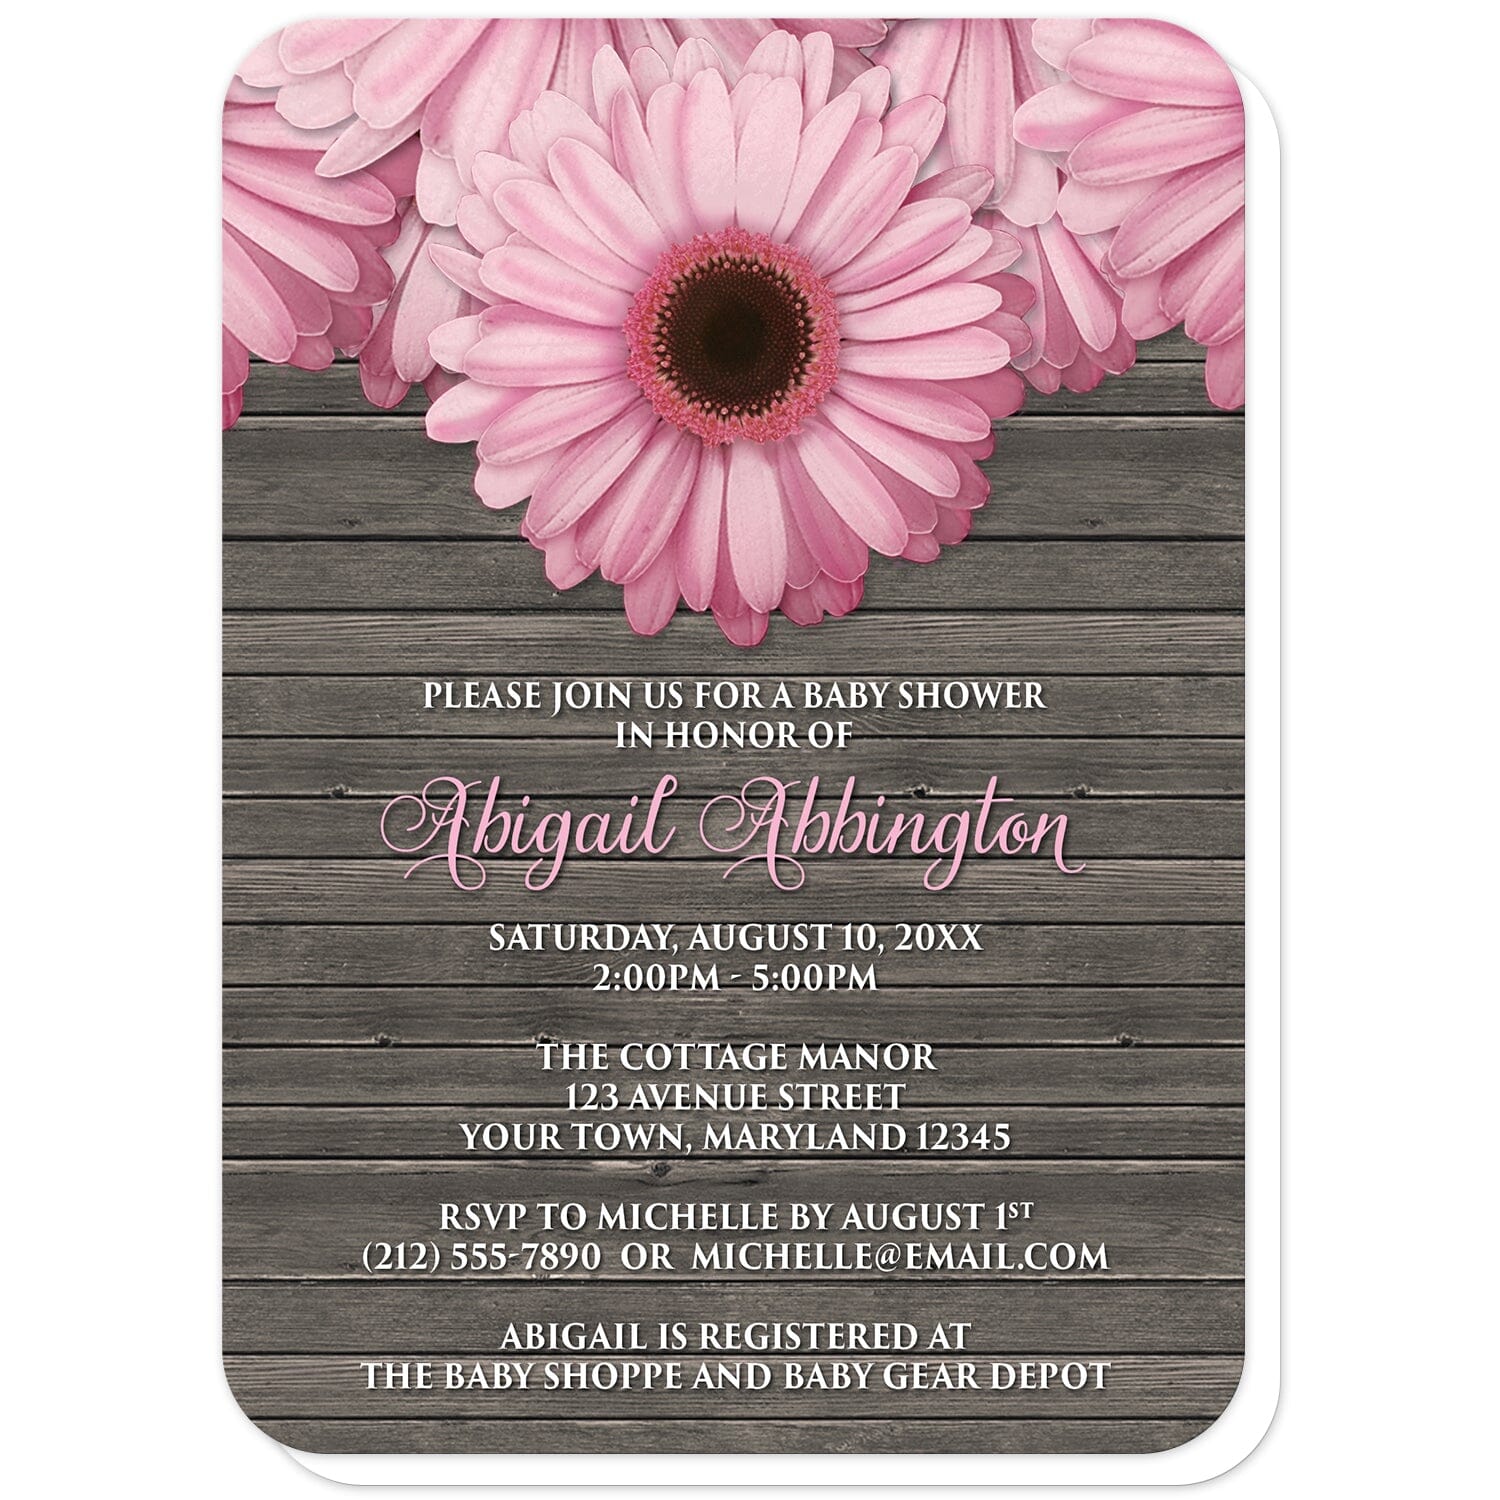 Rustic Pink Daisy Brown Wood Baby Shower Invitations (with rounded corners) at Artistically Invited. Rustic pink daisy brown wood baby shower invitations designed with large and lovely pink daisy flowers along the top over a country brown wood background illustration. Your personalized baby shower celebration details are custom printed in pink and white over the wood background design below the pretty pink daisies.